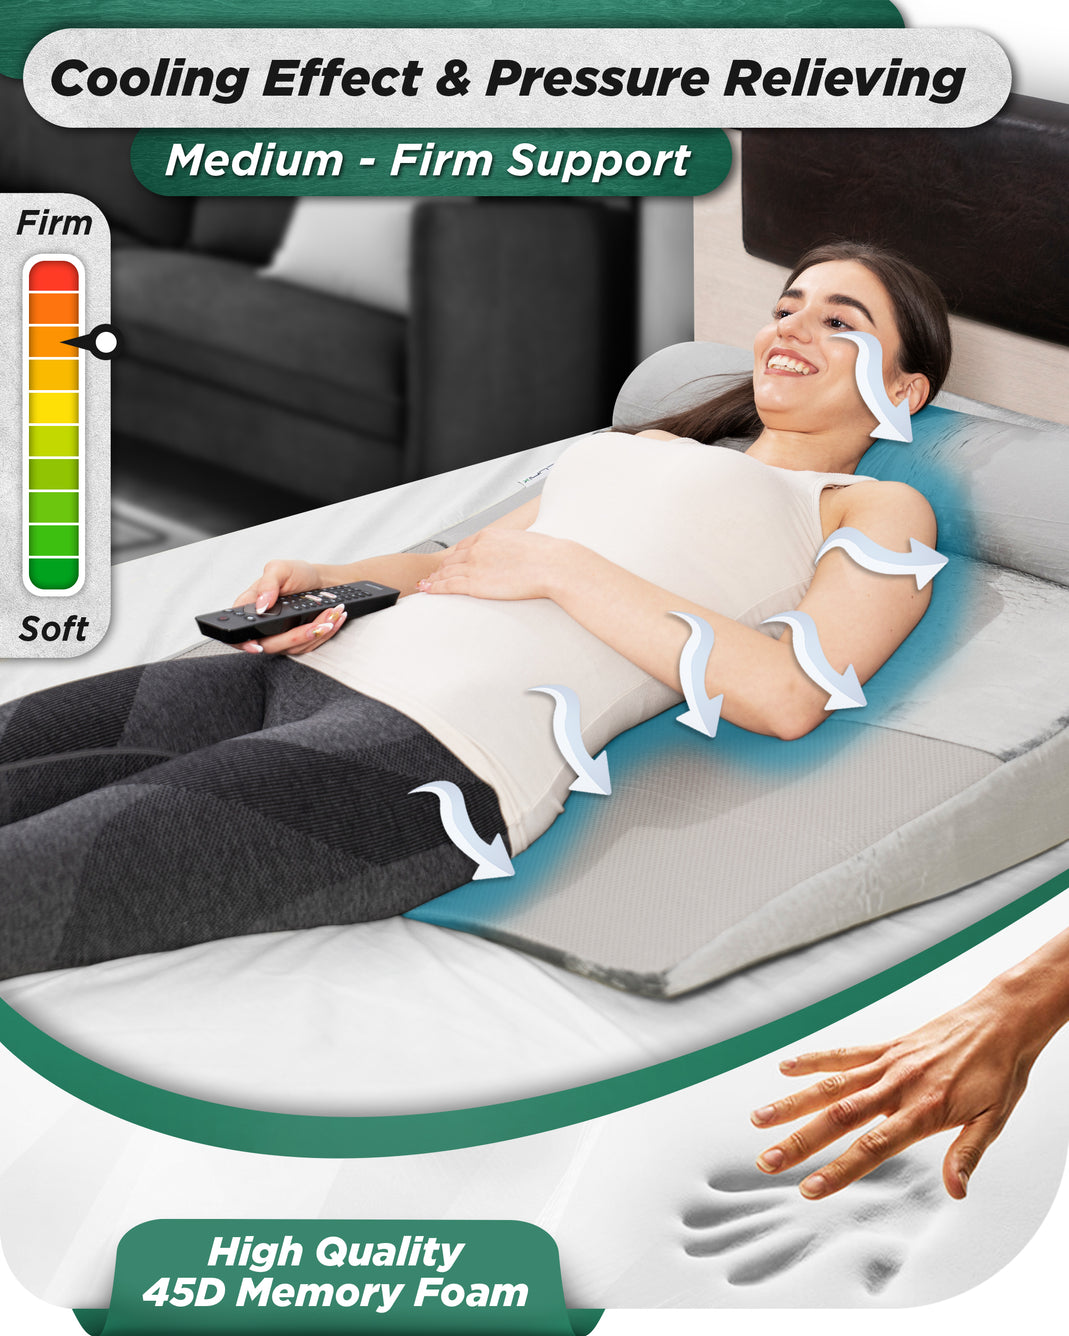 Cushy Form Bed Wedge Pillow - Adjustable Memory Foam Incline Pillows for  Sitting